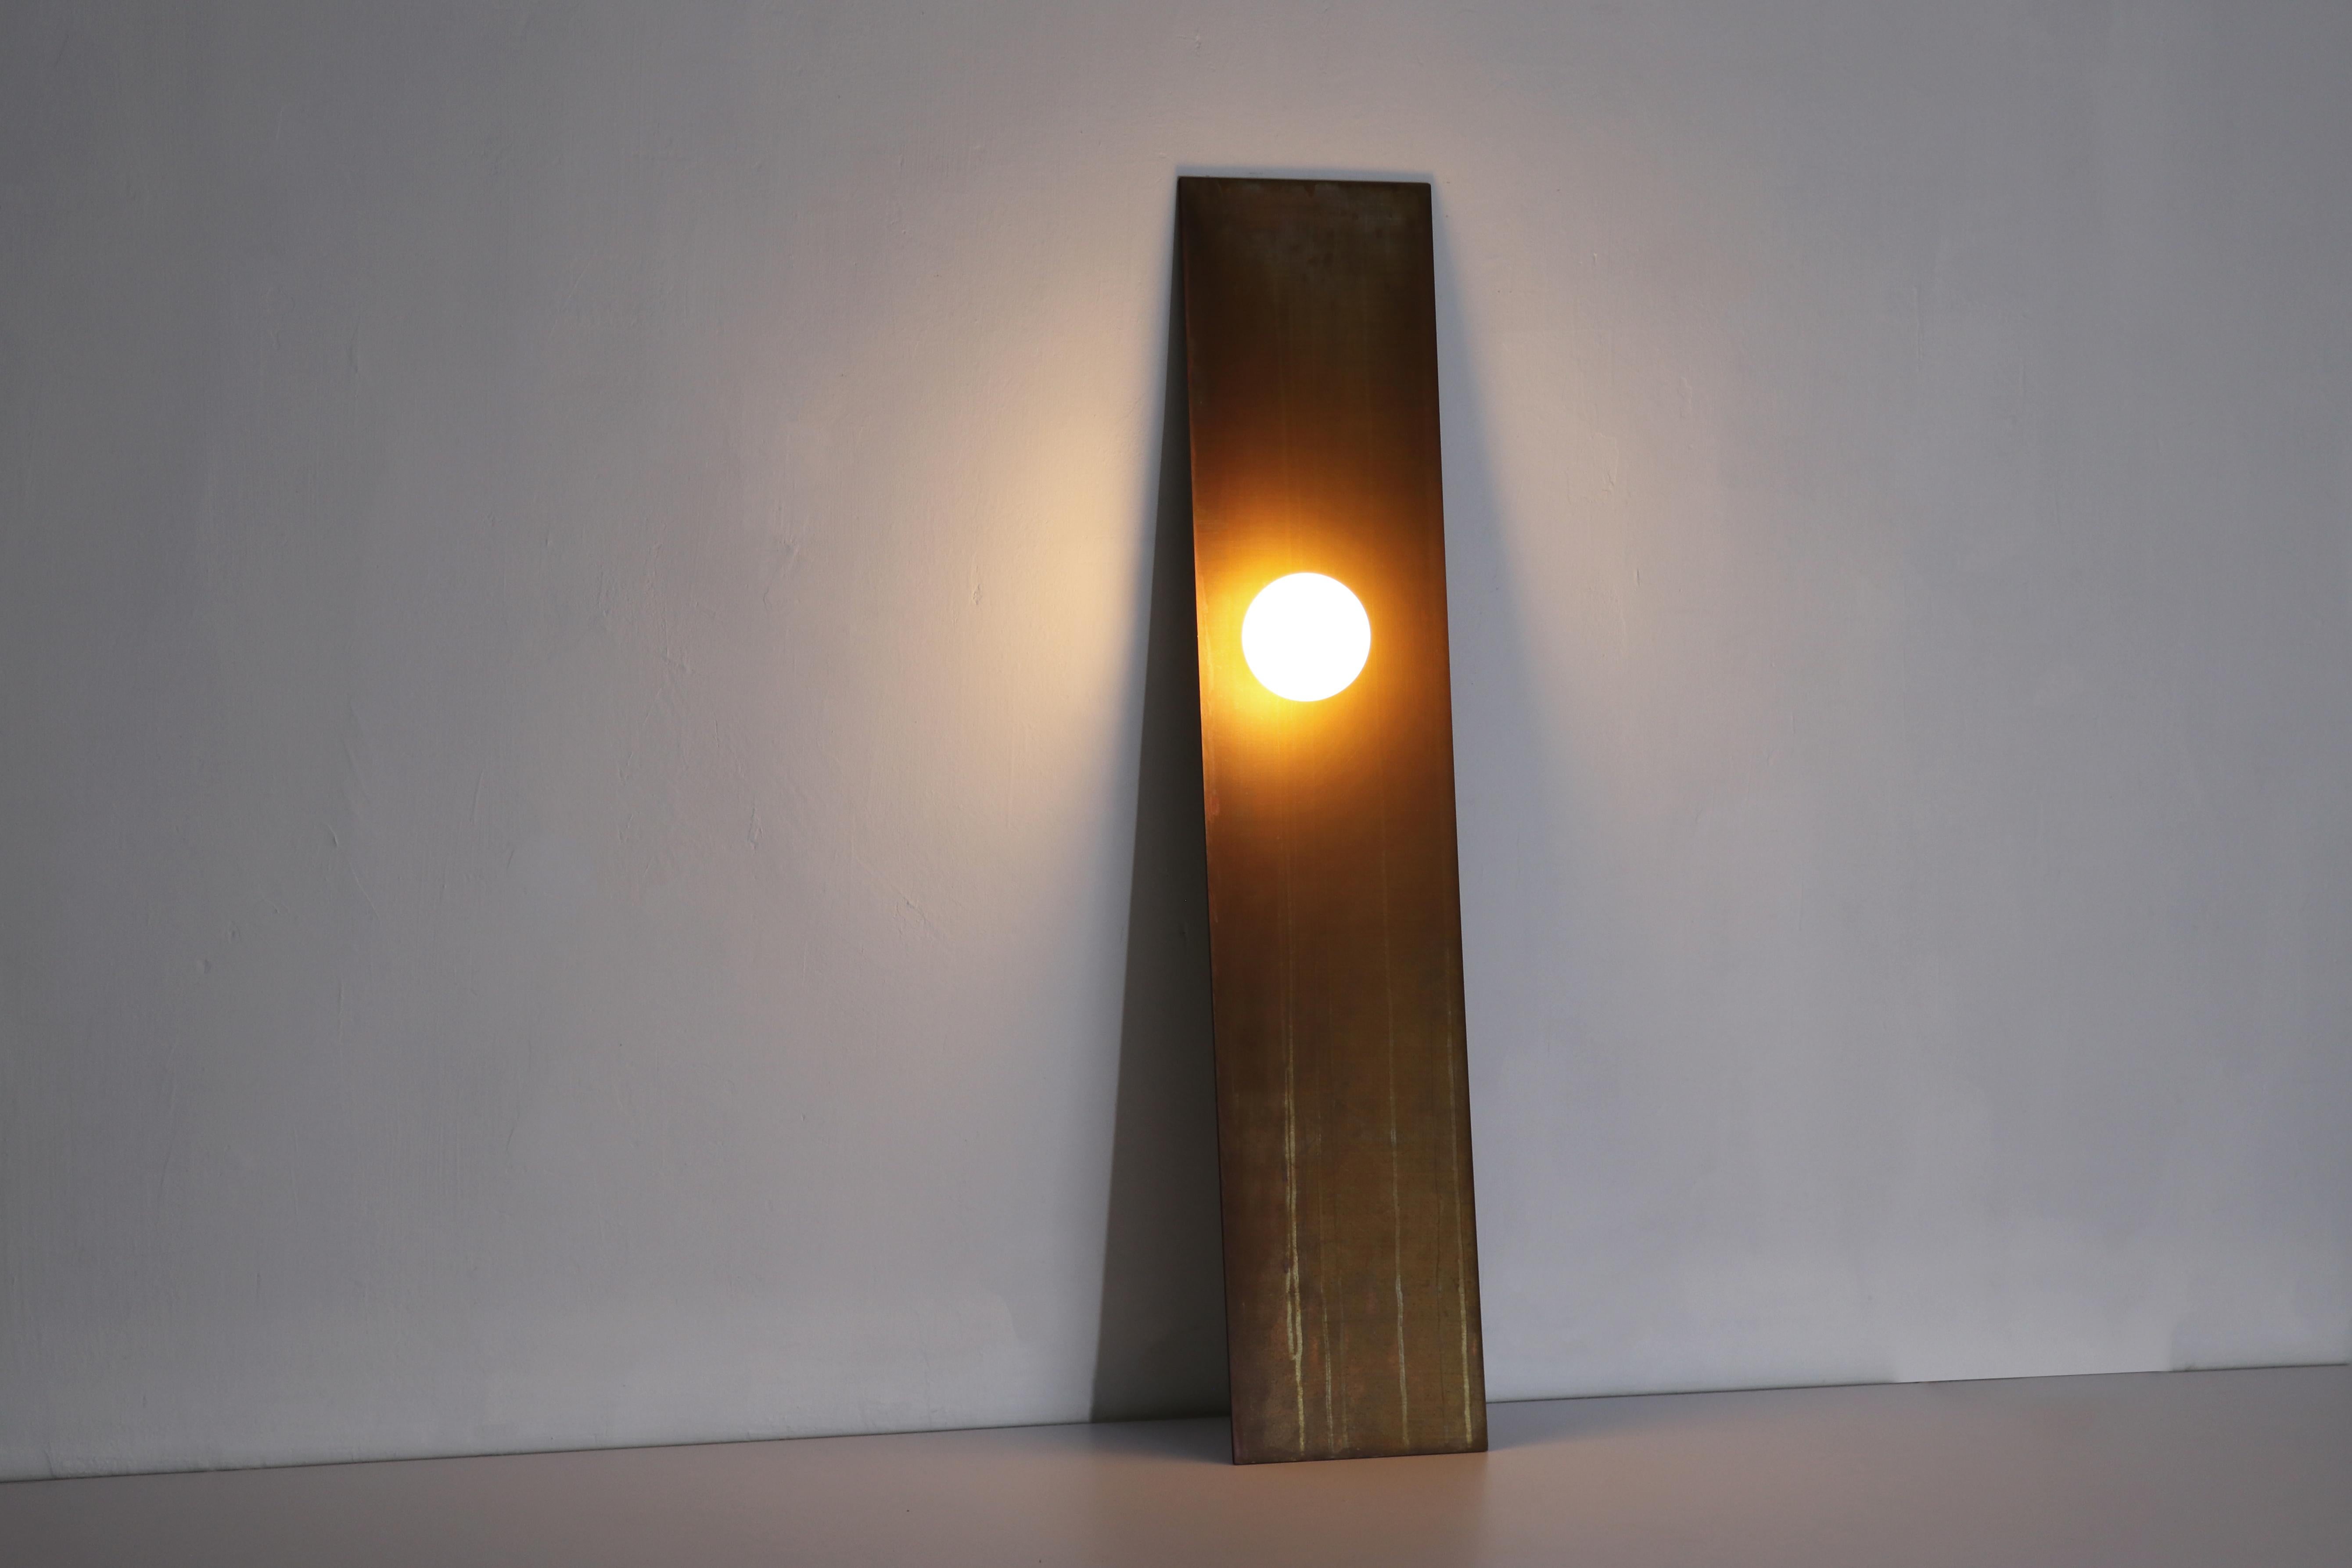 Wall leaning light by Batten and Kamp
Limited edition of 24 + 3 AP.
Dimensions: D 26 x W 2 x H 120 cm 
Materials: Weather worn copper
All our lamps can be wired according to each country. If sold to the USA it will be wired for the USA for